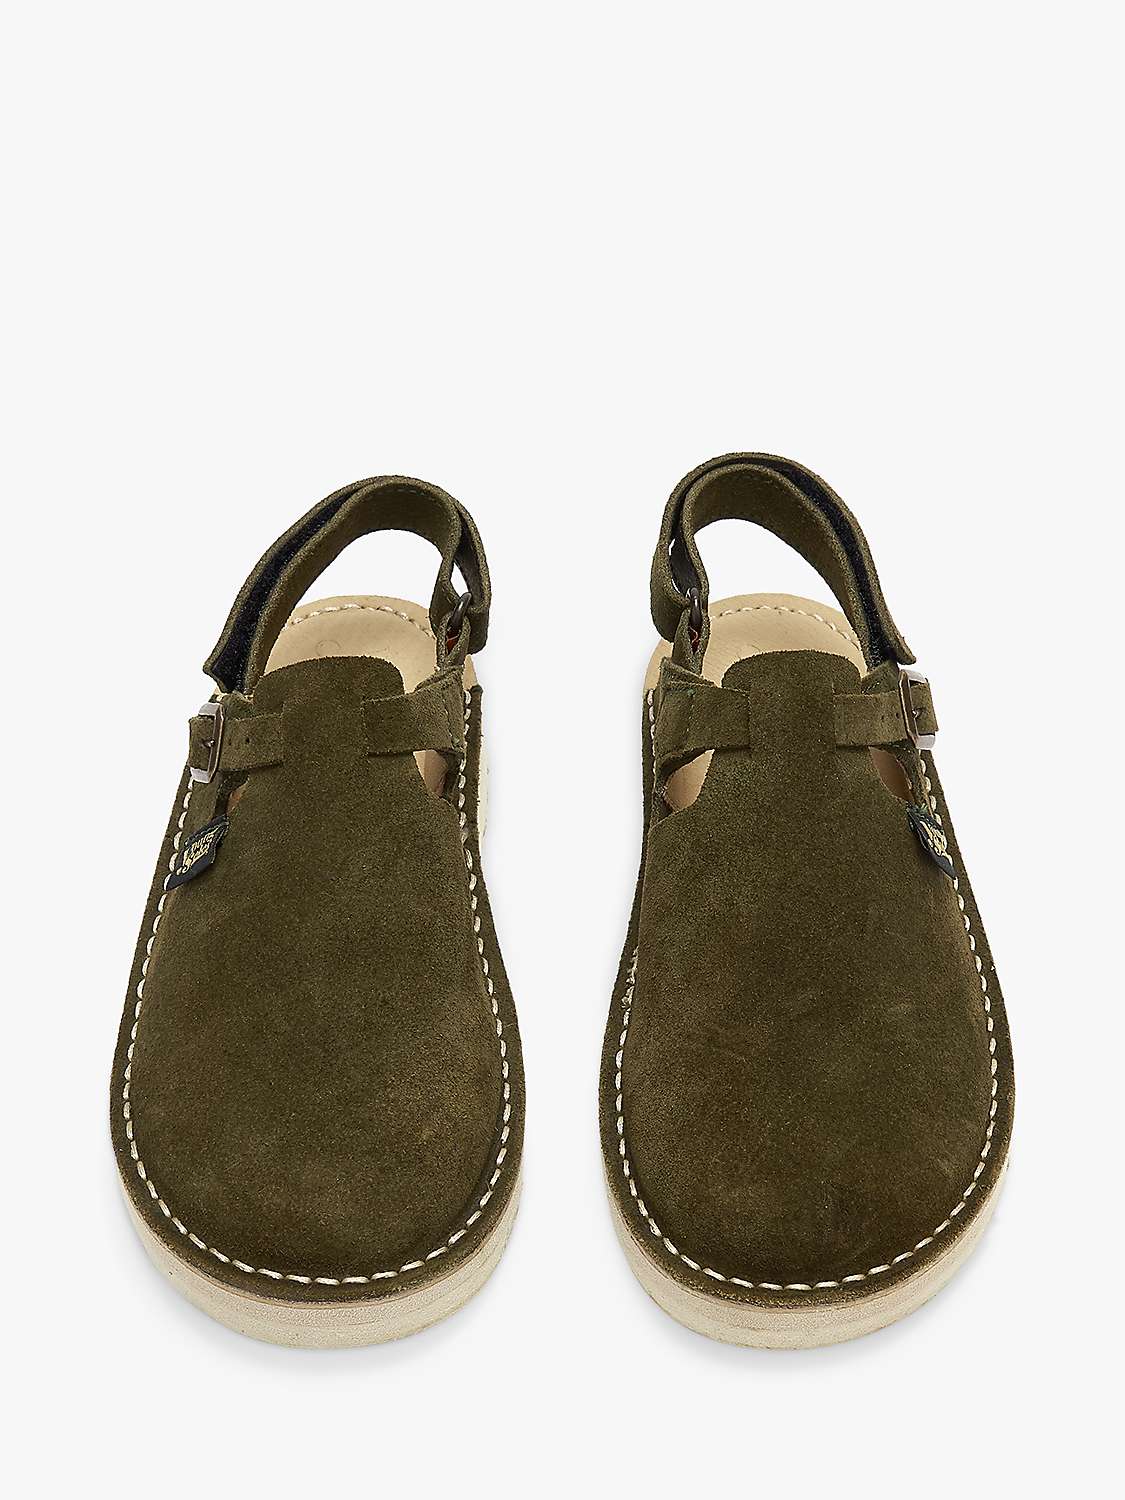 Buy Young Soles Kids' Heidi Suede Clogs Online at johnlewis.com